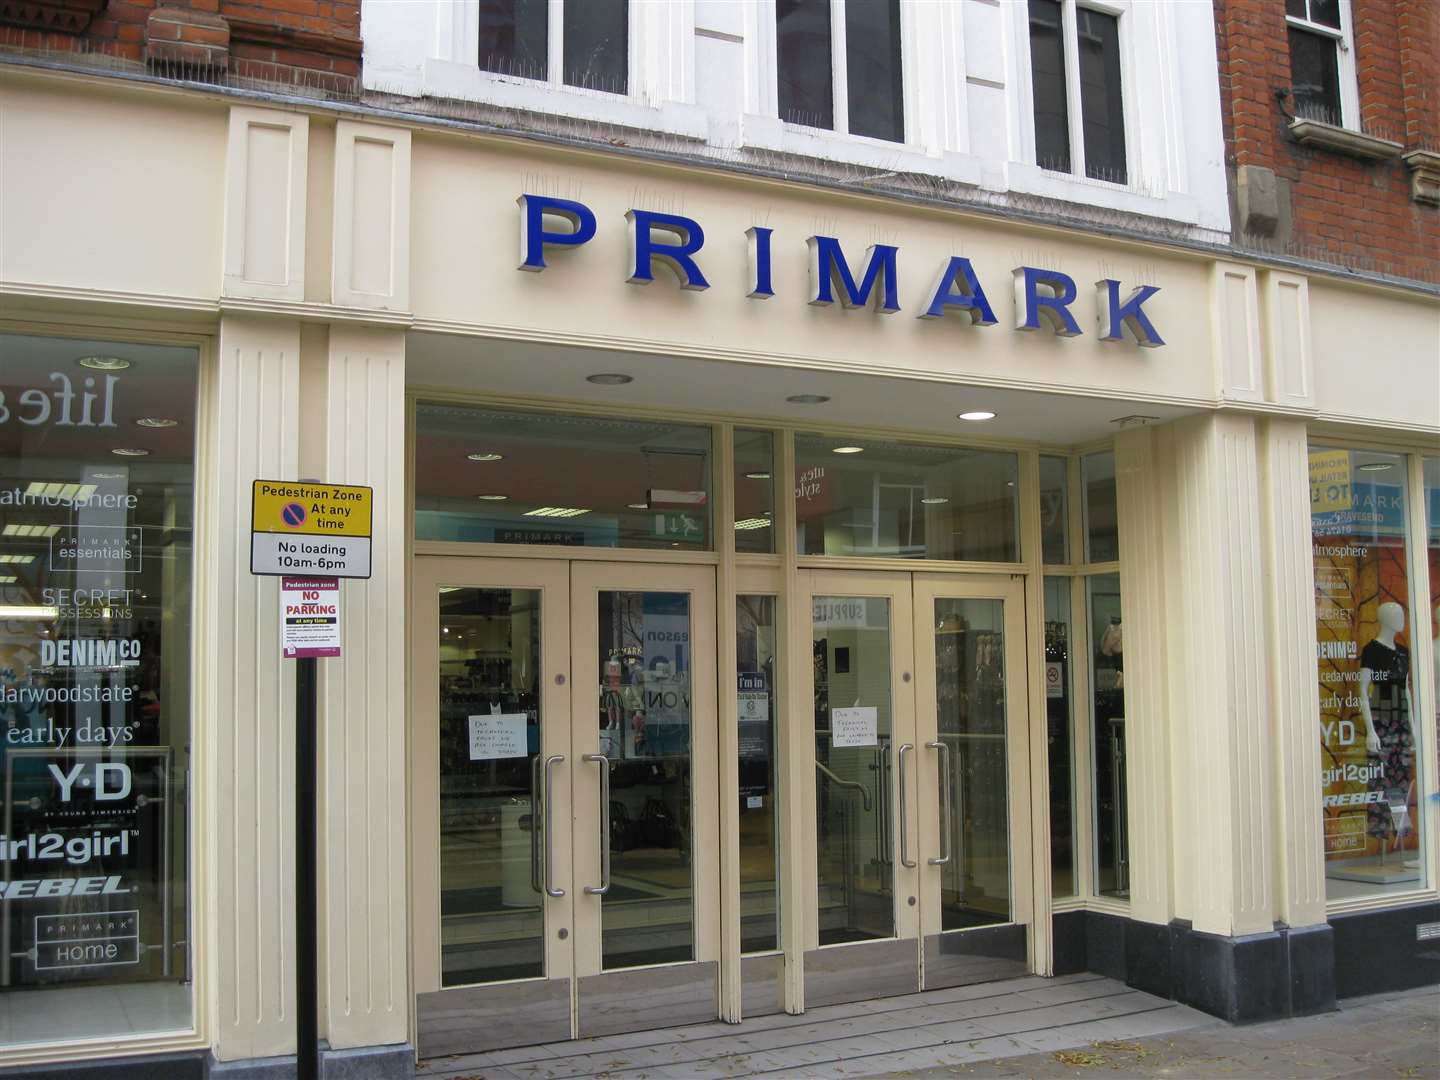 Officers were called to the Primark store in Gravesend following a report of alleged upskirting